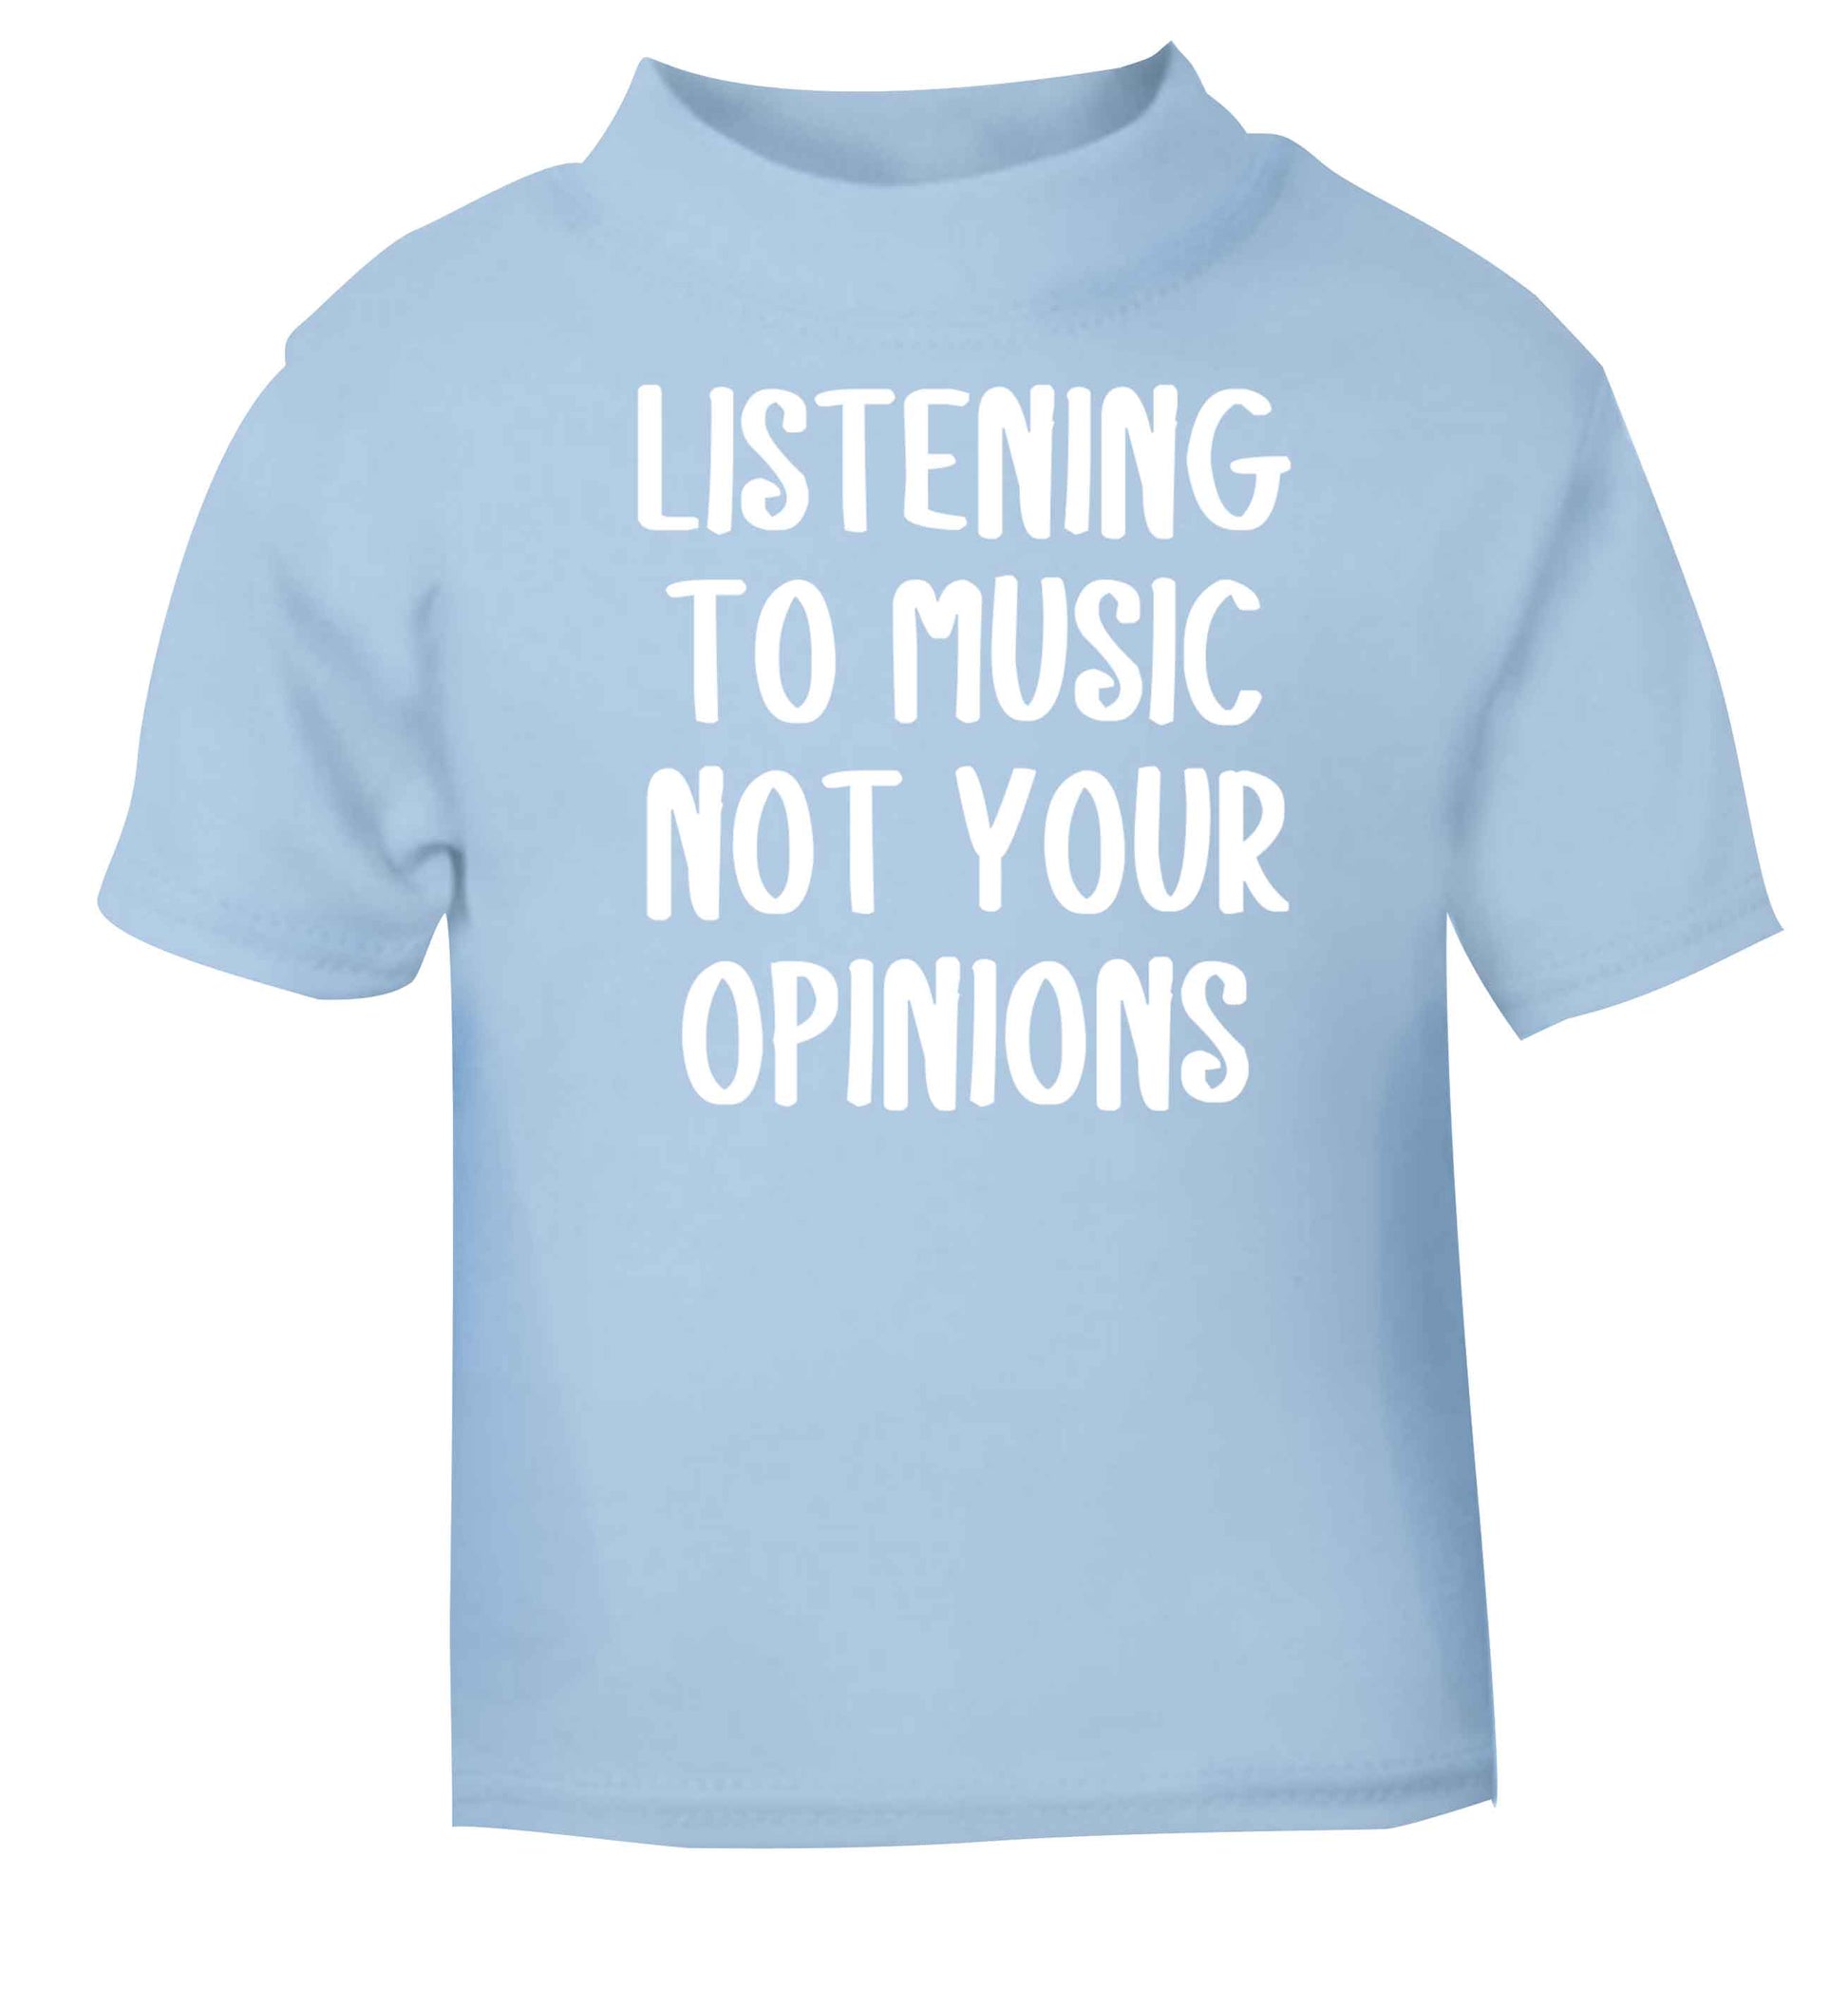 Listening to music not your opinions light blue baby toddler Tshirt 2 Years